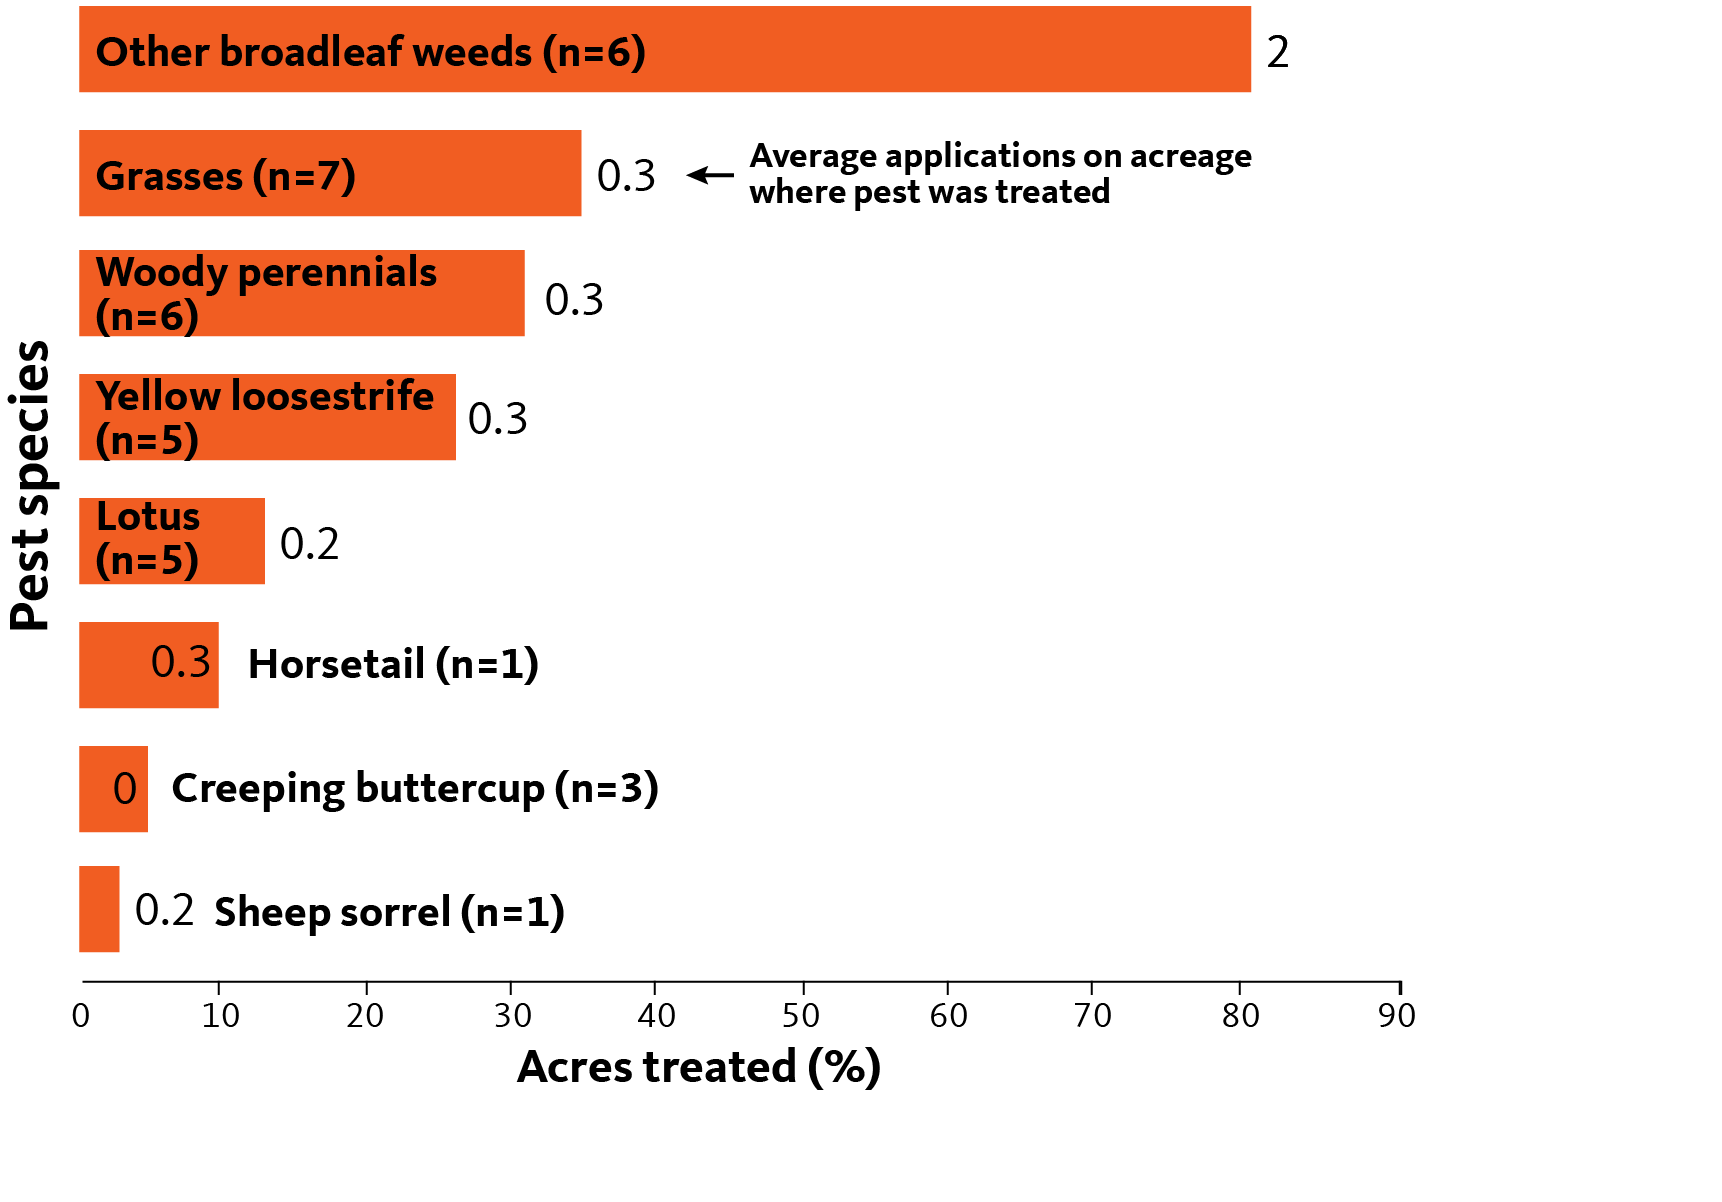 Bar chart showing top weeds